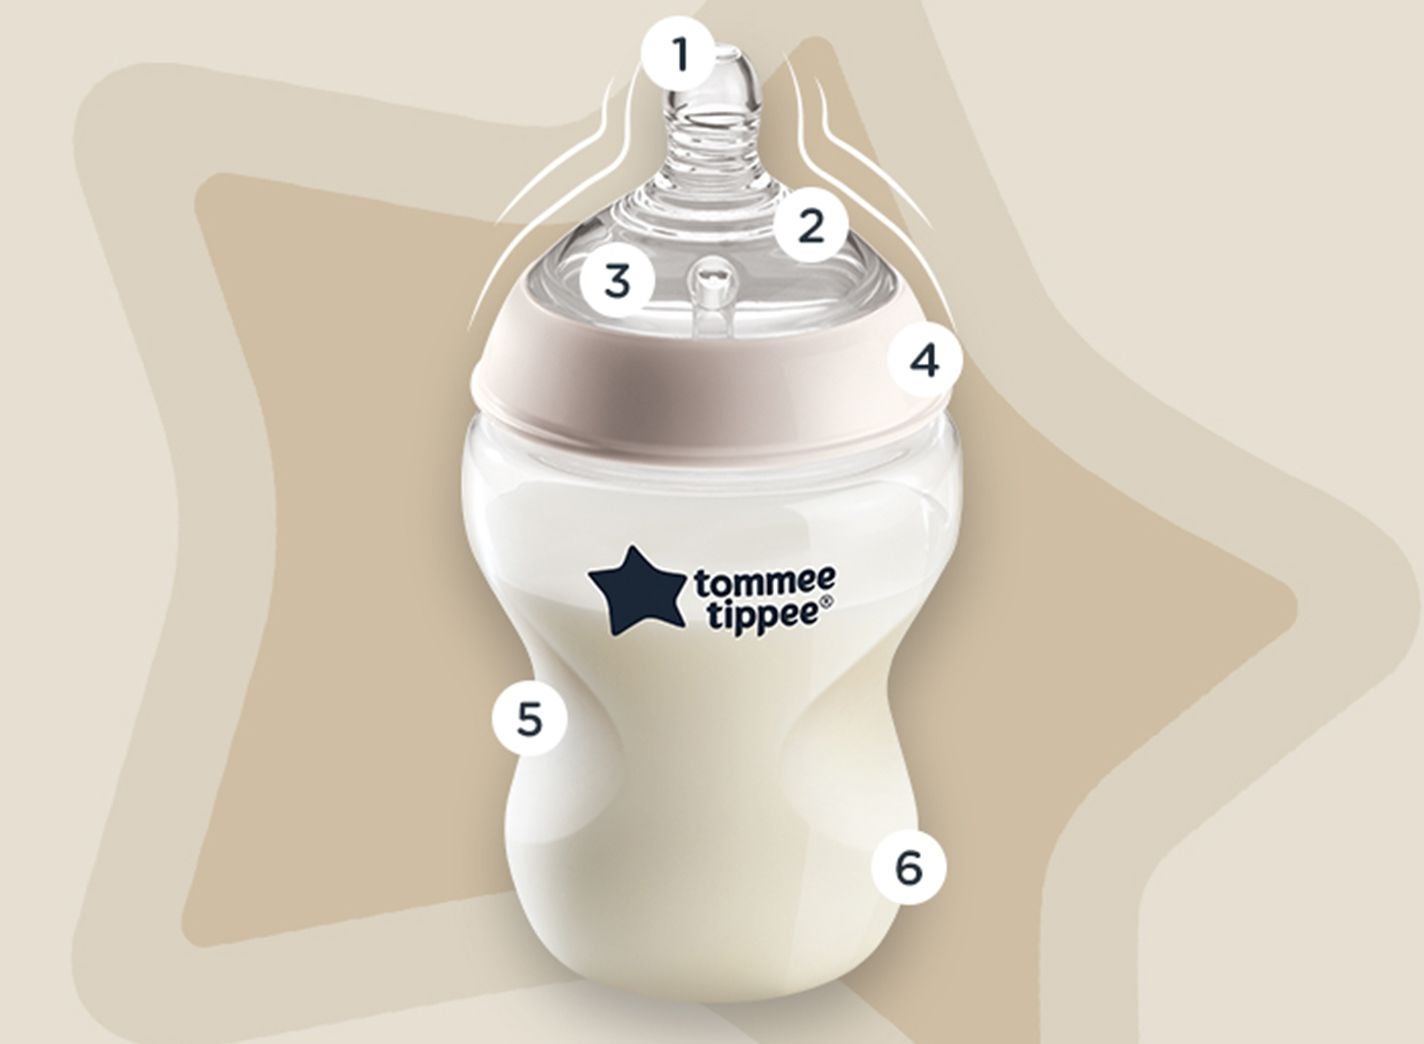 Tommee Tippee Natural Start Anti-Colic Baby Bottle, 11oz, Medium-Flow and  Thicker Feed Breast-Like Nipple, Anti-Colic Valve, 1 Pack